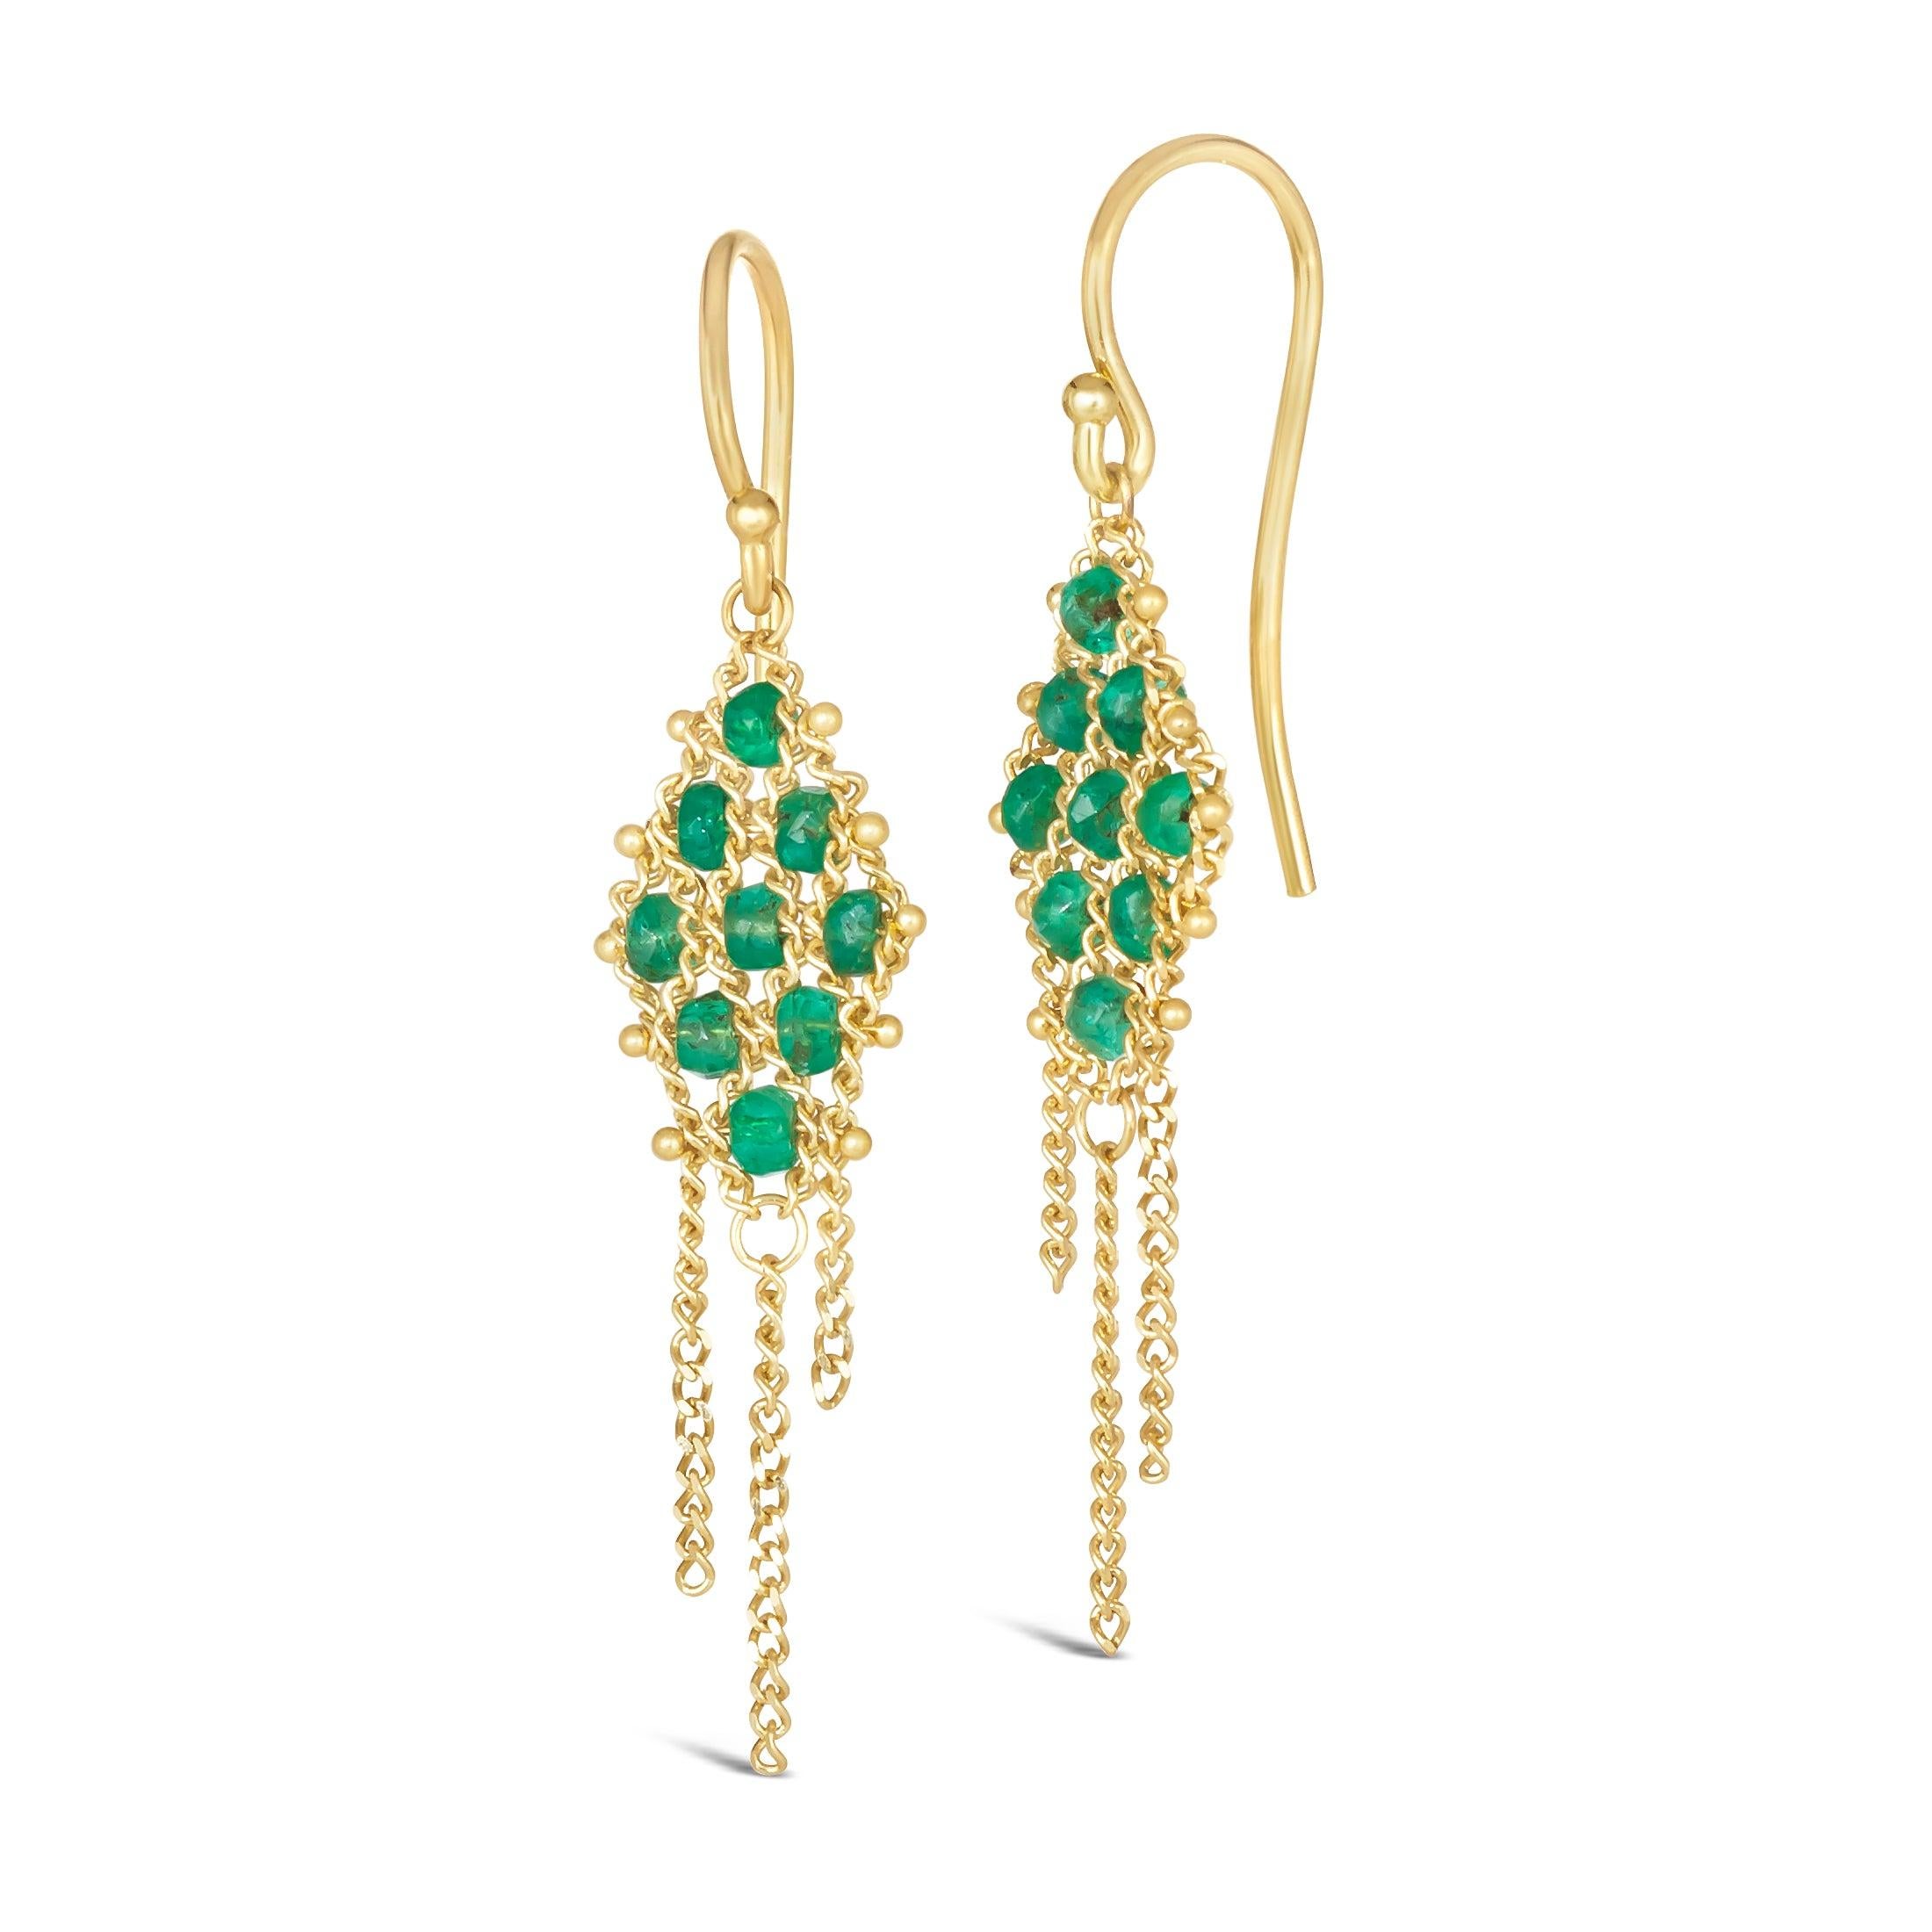 Woven Lattice Earrings in Emerald In New Condition For Sale In Chapel Hill, NC